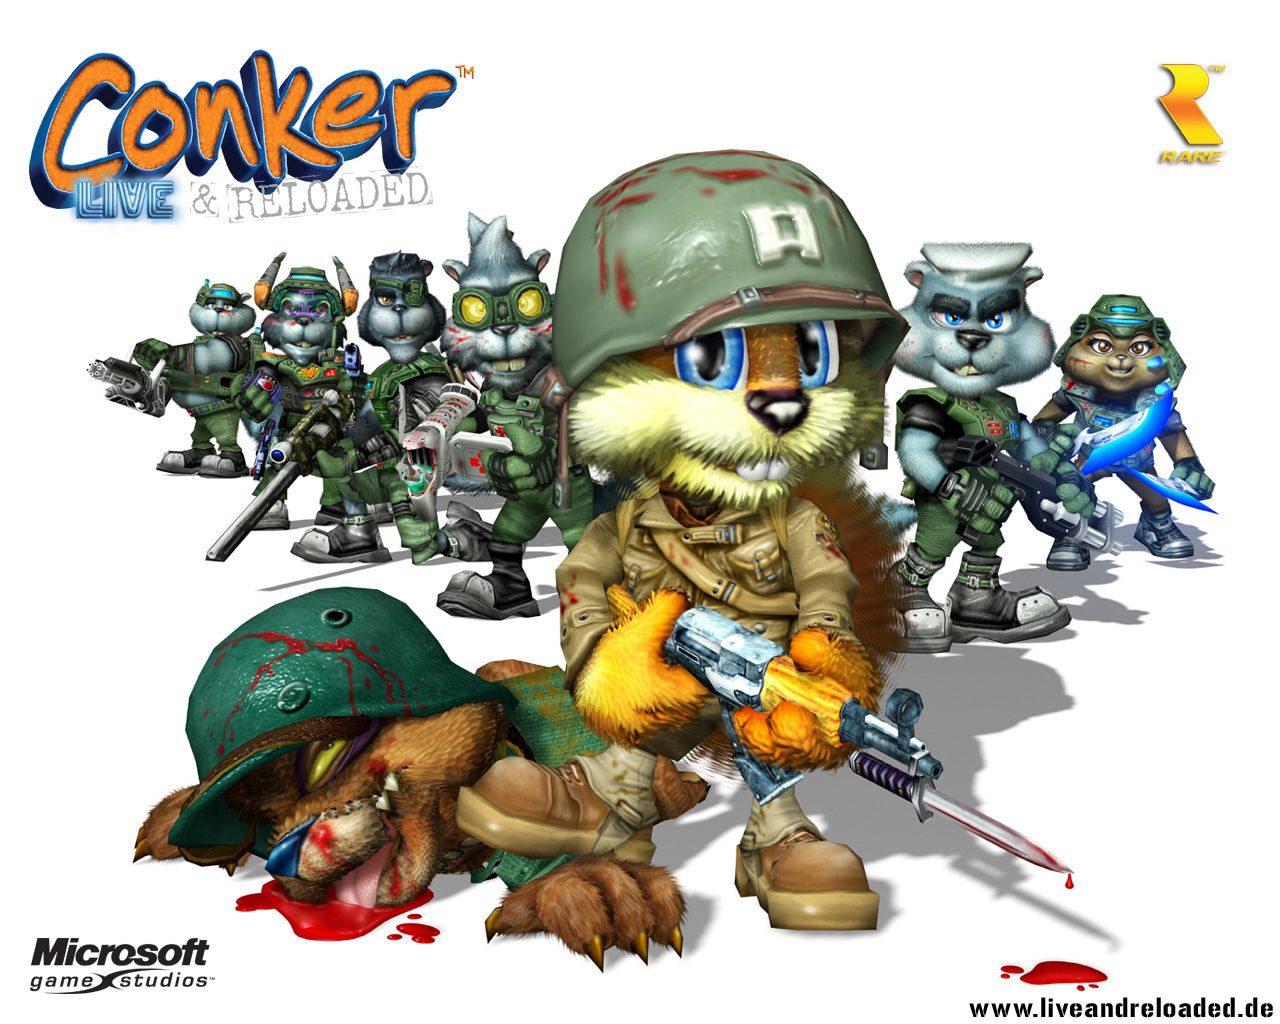 Conker Wallpaper. Conker Wallpaper, Conker Desktop Background and Conker Squirrel Wallpaper